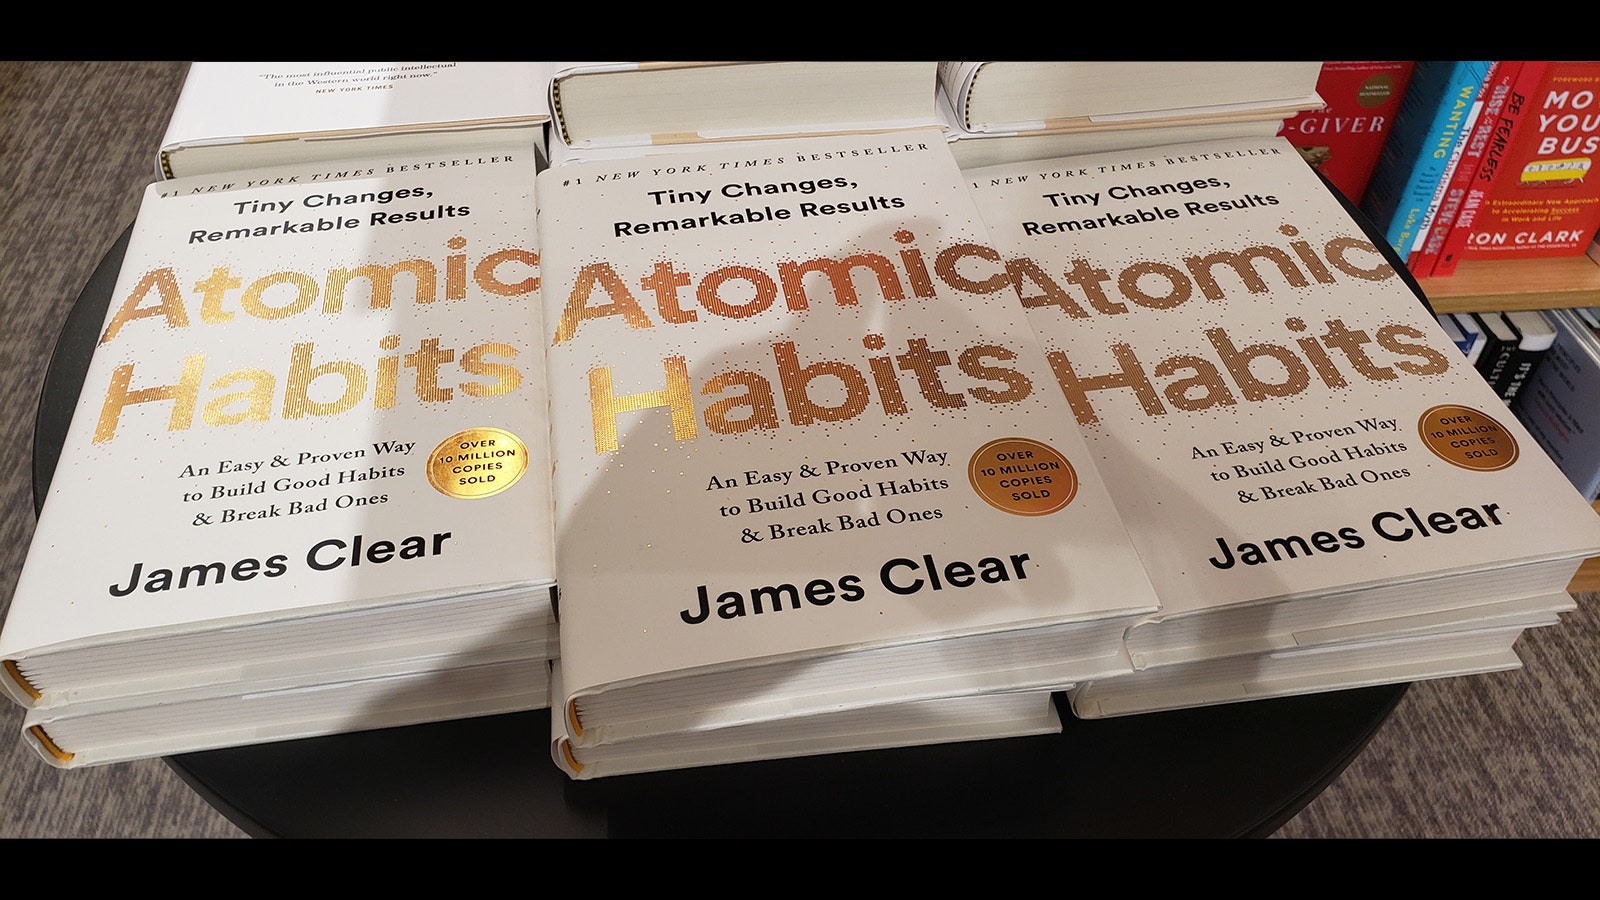 "Atomic Habits" is an example of the "best of the best" in the self-improvement category. The book has had some staying power since it was published in 2018 and has continued to sell well.